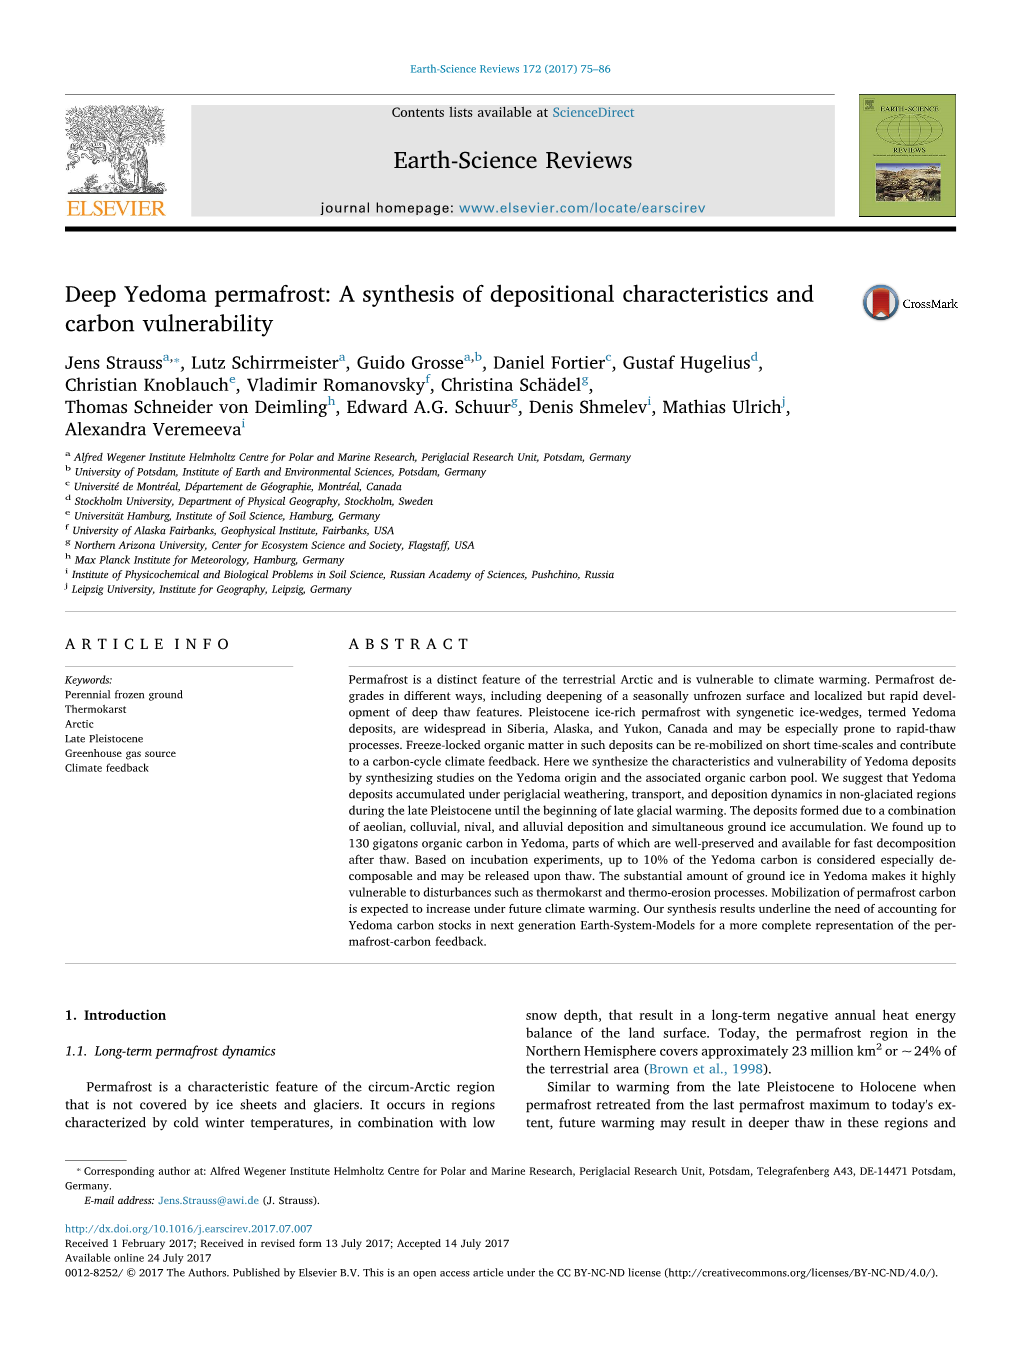 Deep Yedoma Permafrost a Synthesis of Depositional Characteristics and Carbon Vulnerability